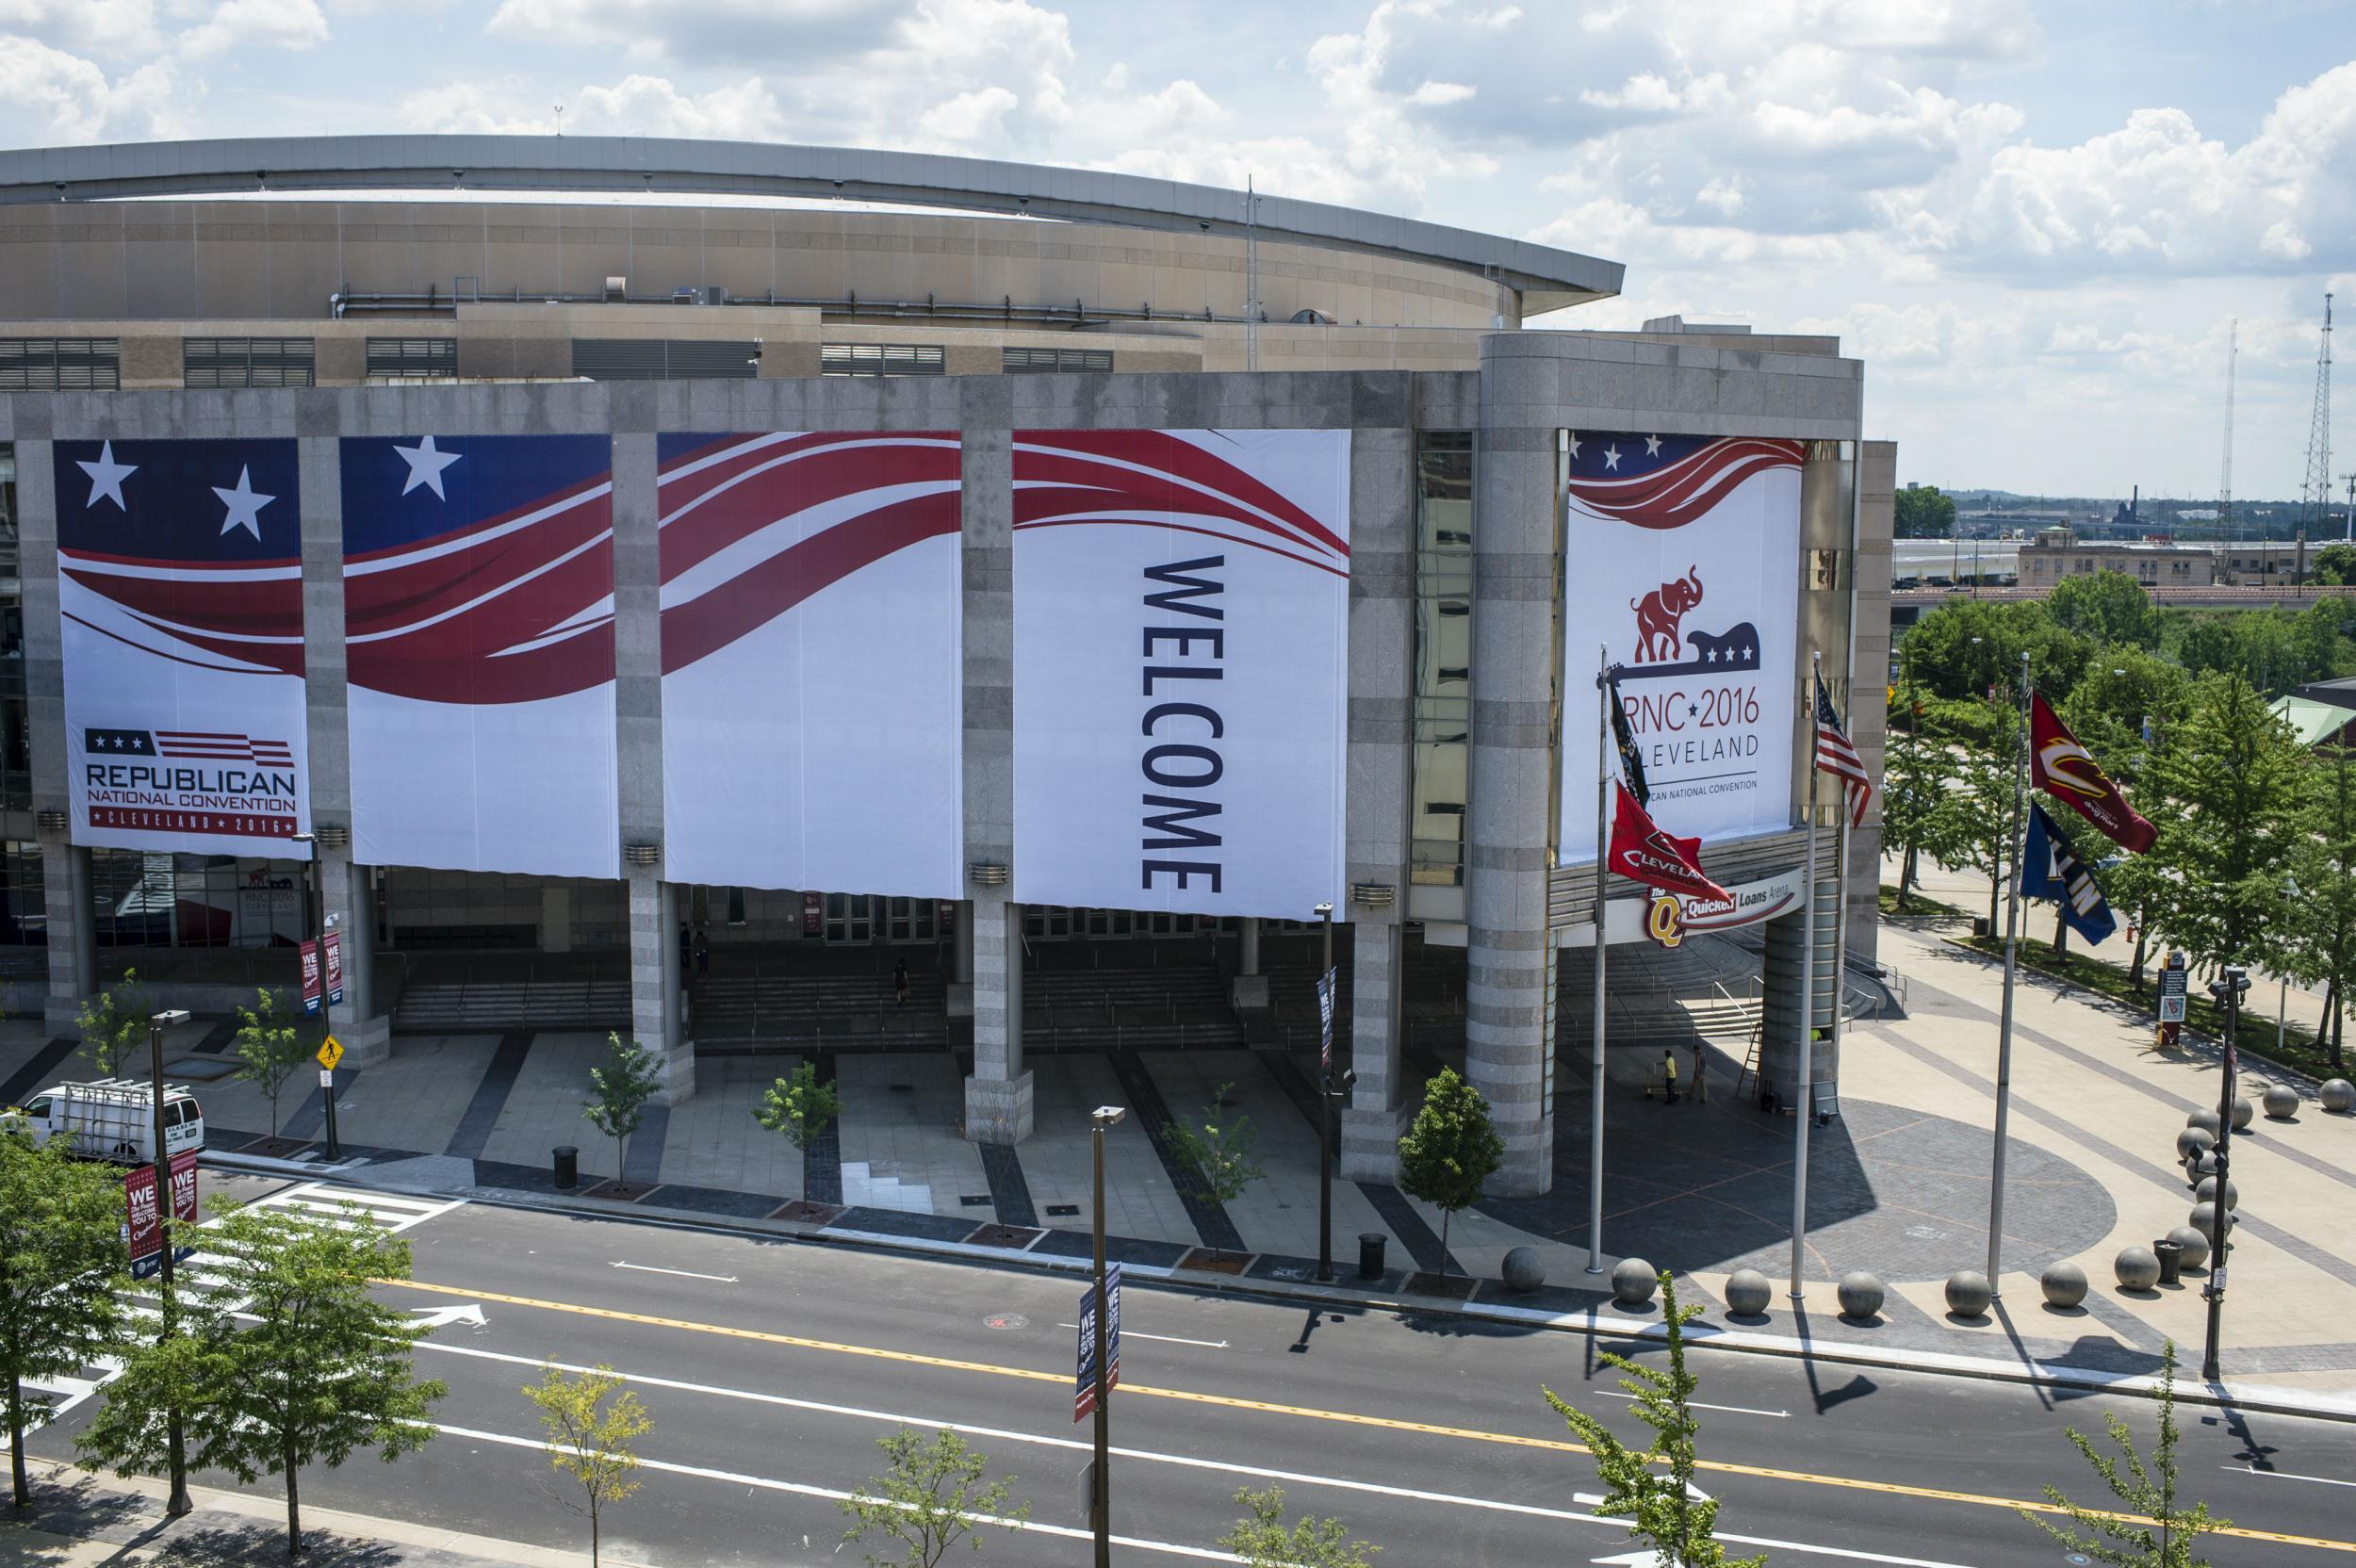 The Quicken Loans Arena is dressed up for the Convention